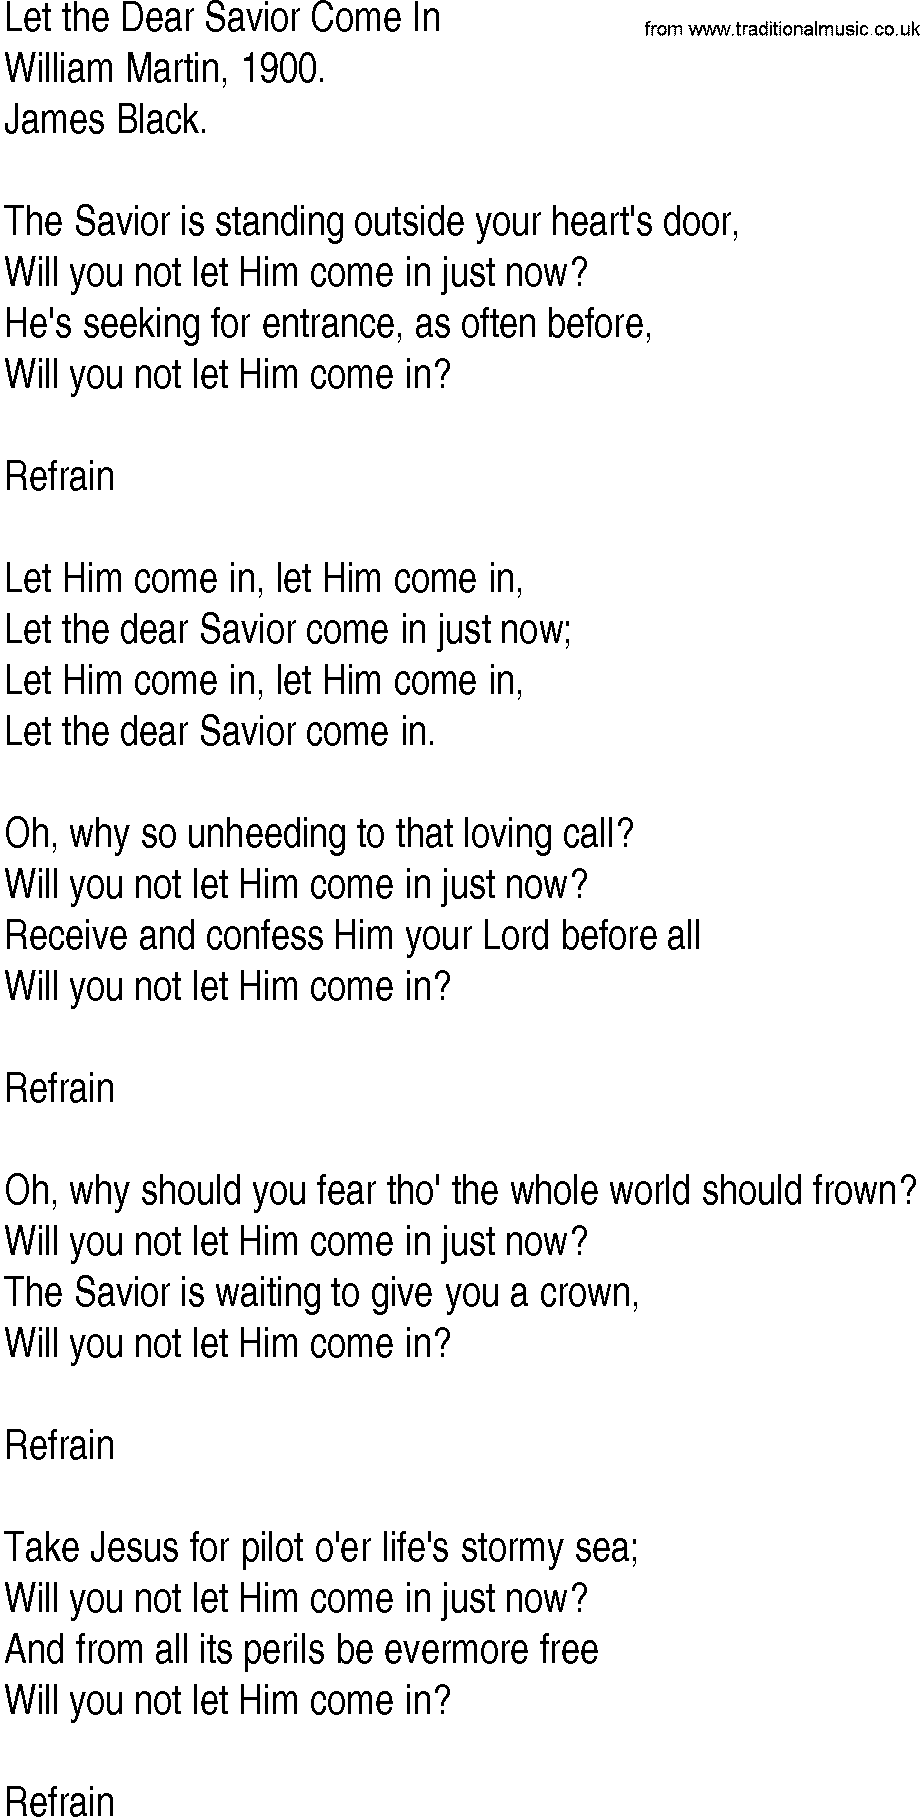 Hymn and Gospel Song: Let the Dear Savior Come In by William Martin lyrics